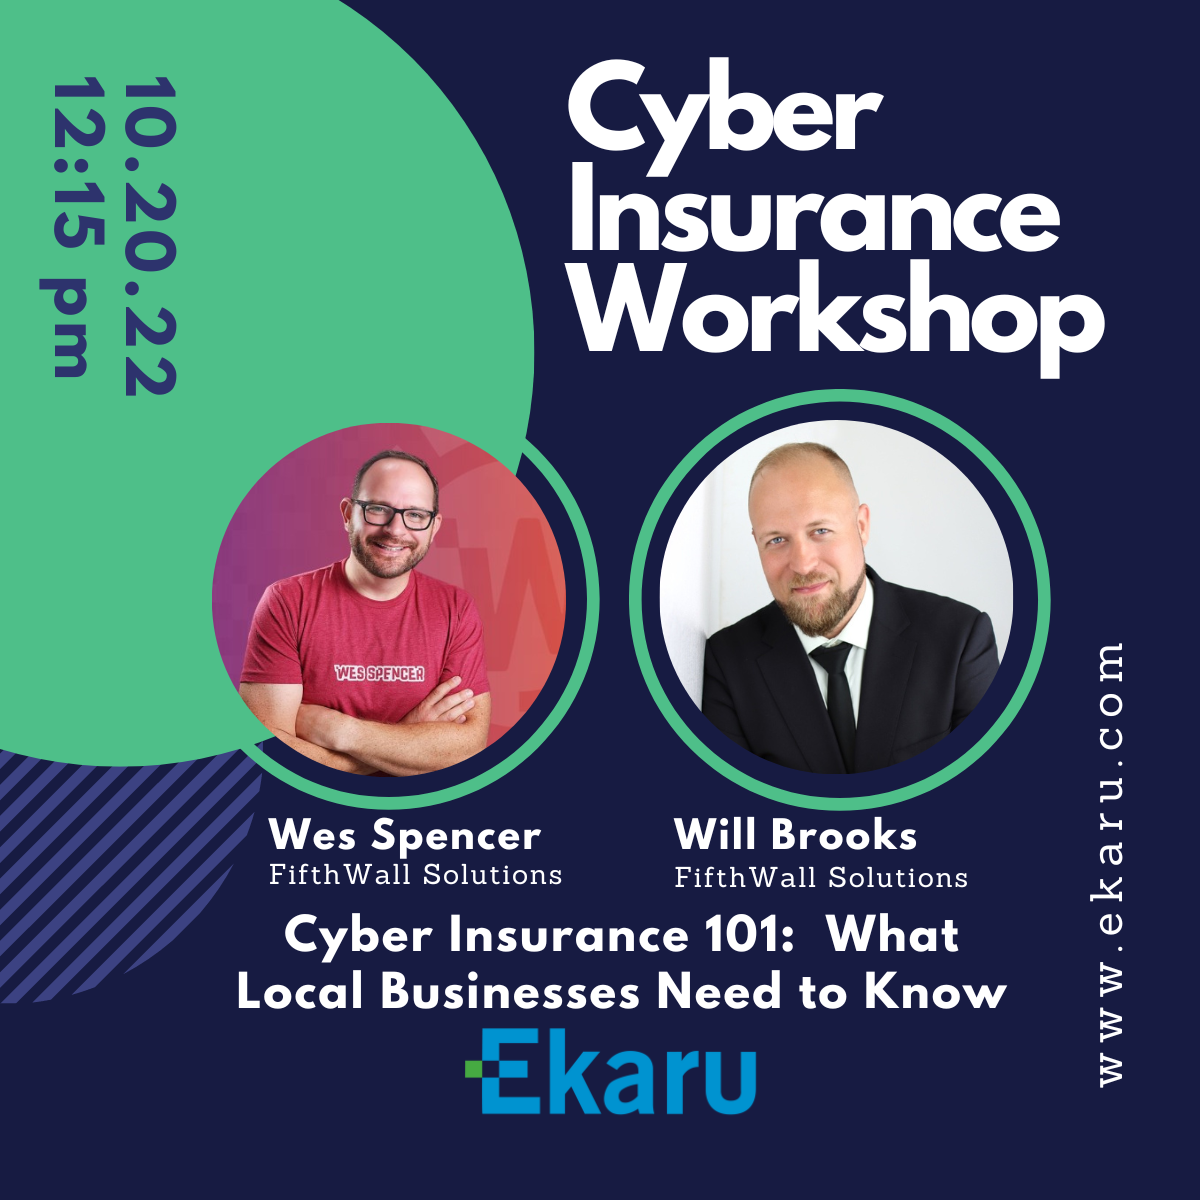 10/20/2022 - Cyber Insurance 101: What Local Businesses Need to Know